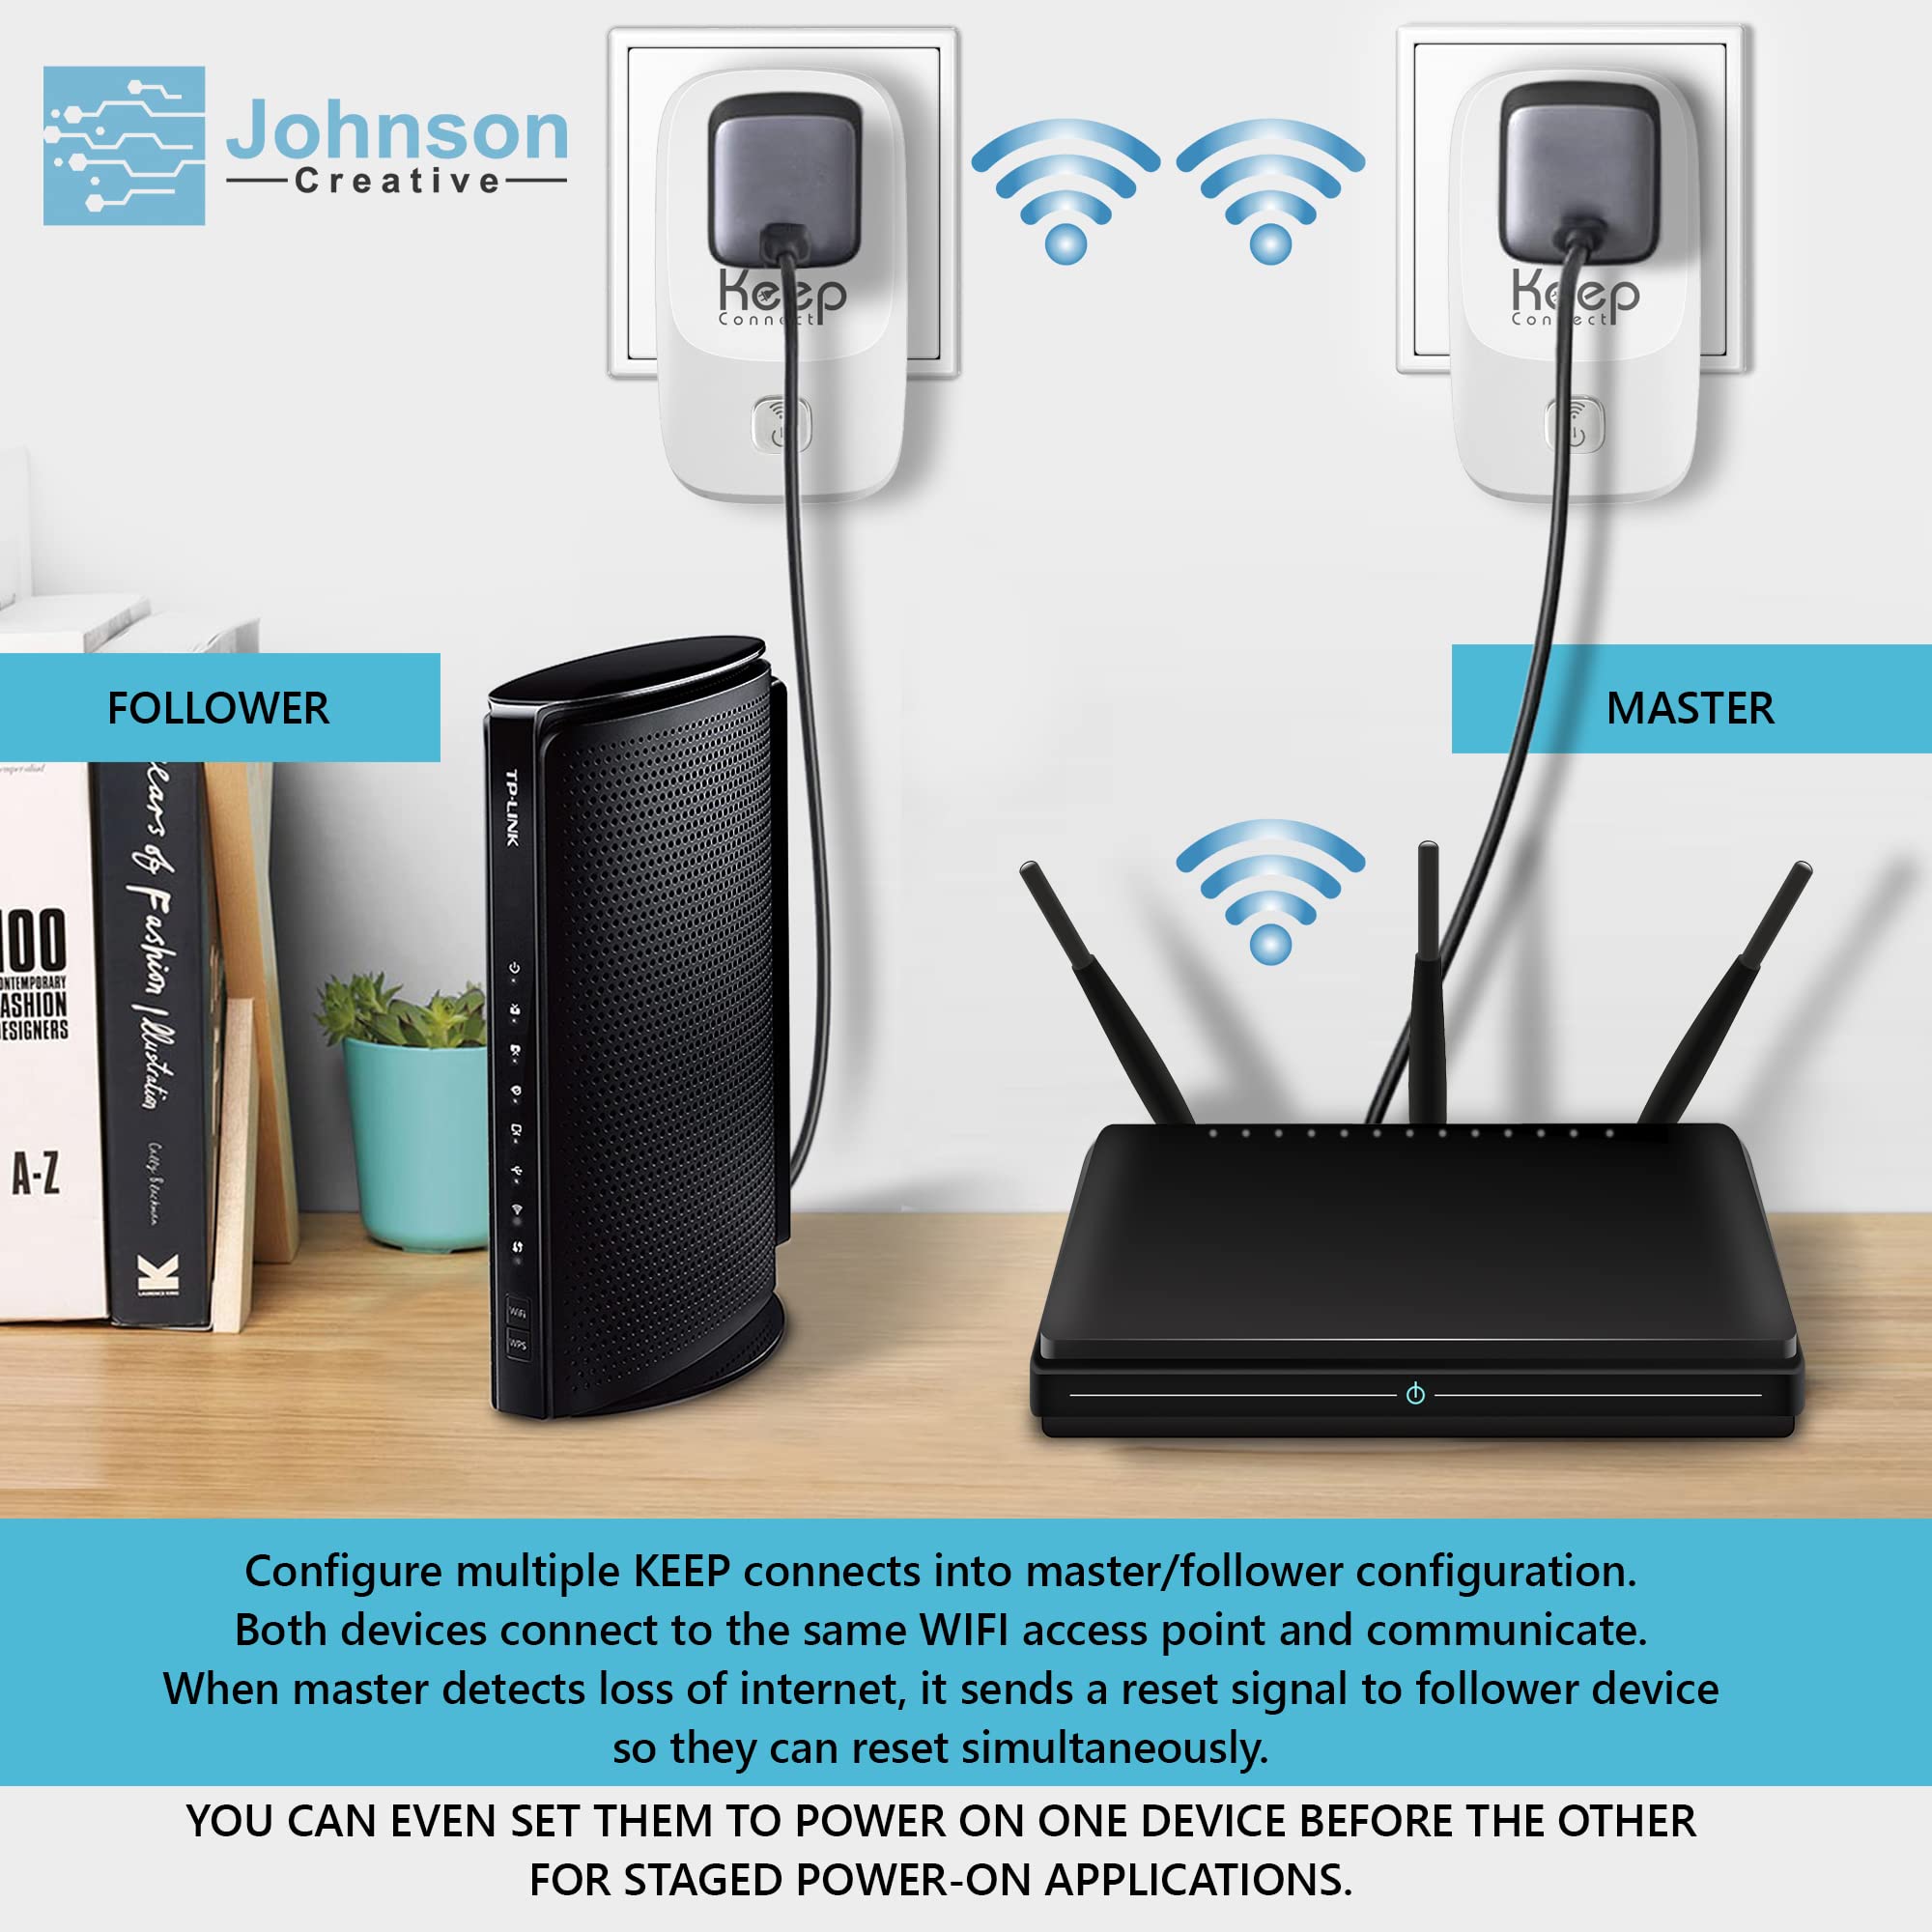 Ensure your device is connected to the internet.
Restart your router or modem.